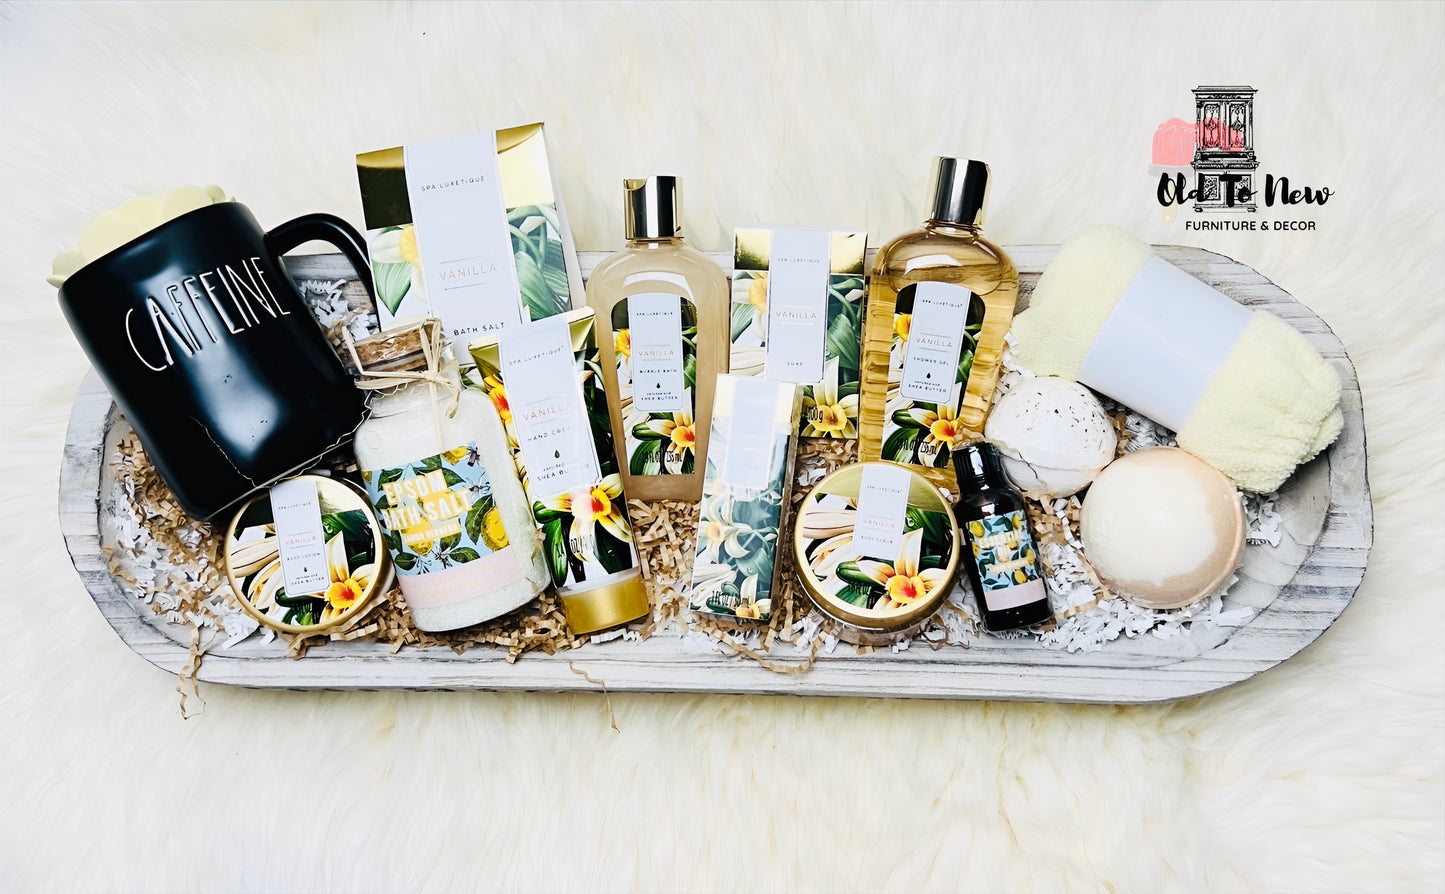 Deluxe Vanilla Spa Gift pack with pampering spa treats body wash, body scrub, body cream, bubble bath, massage oil, bath bomb & more | Old to New Furniture & Deco | Mothers Day, Birthday, Housewarming, Christmas, Valentines Day